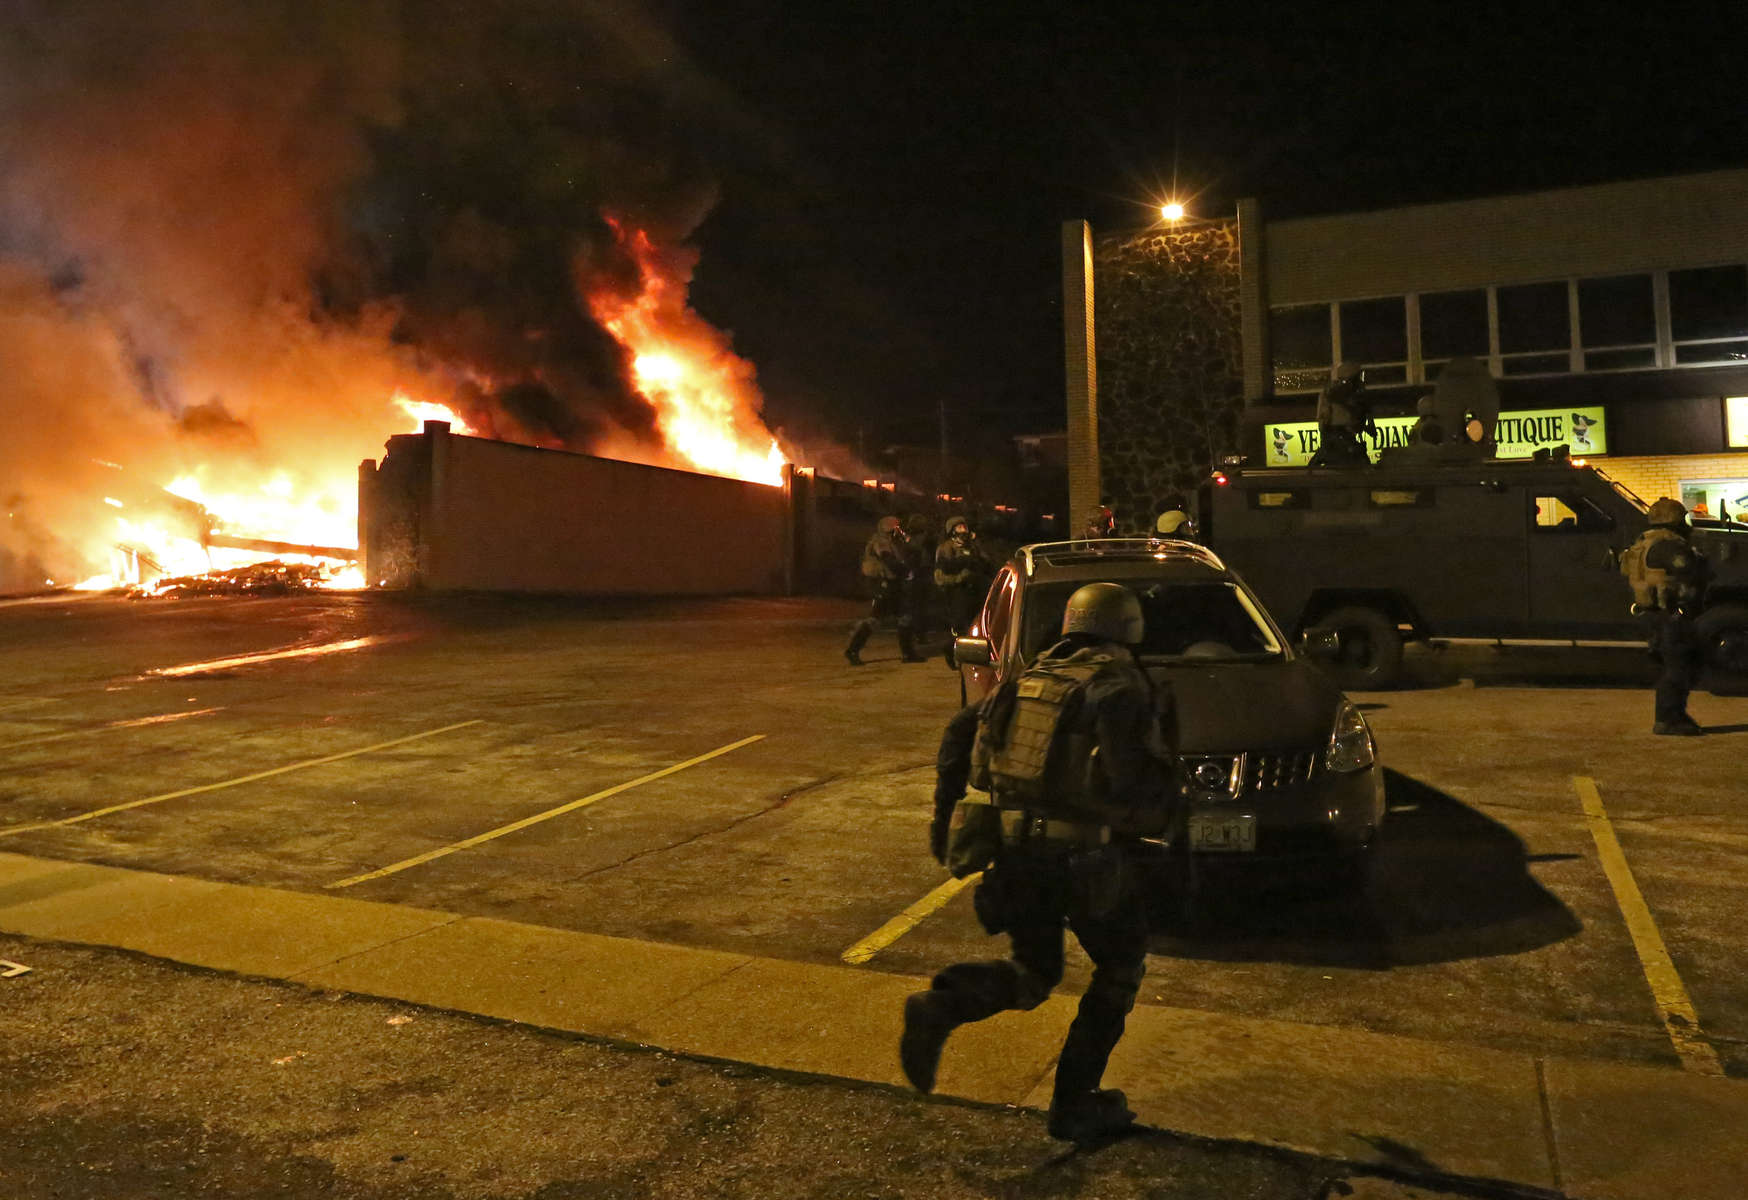 Police officers gather outside the Beauty Town building as it is engulfed in flames on Monday, Nov. 24, 2014. Photo By David Carson, dcarson@post-dispatch.com